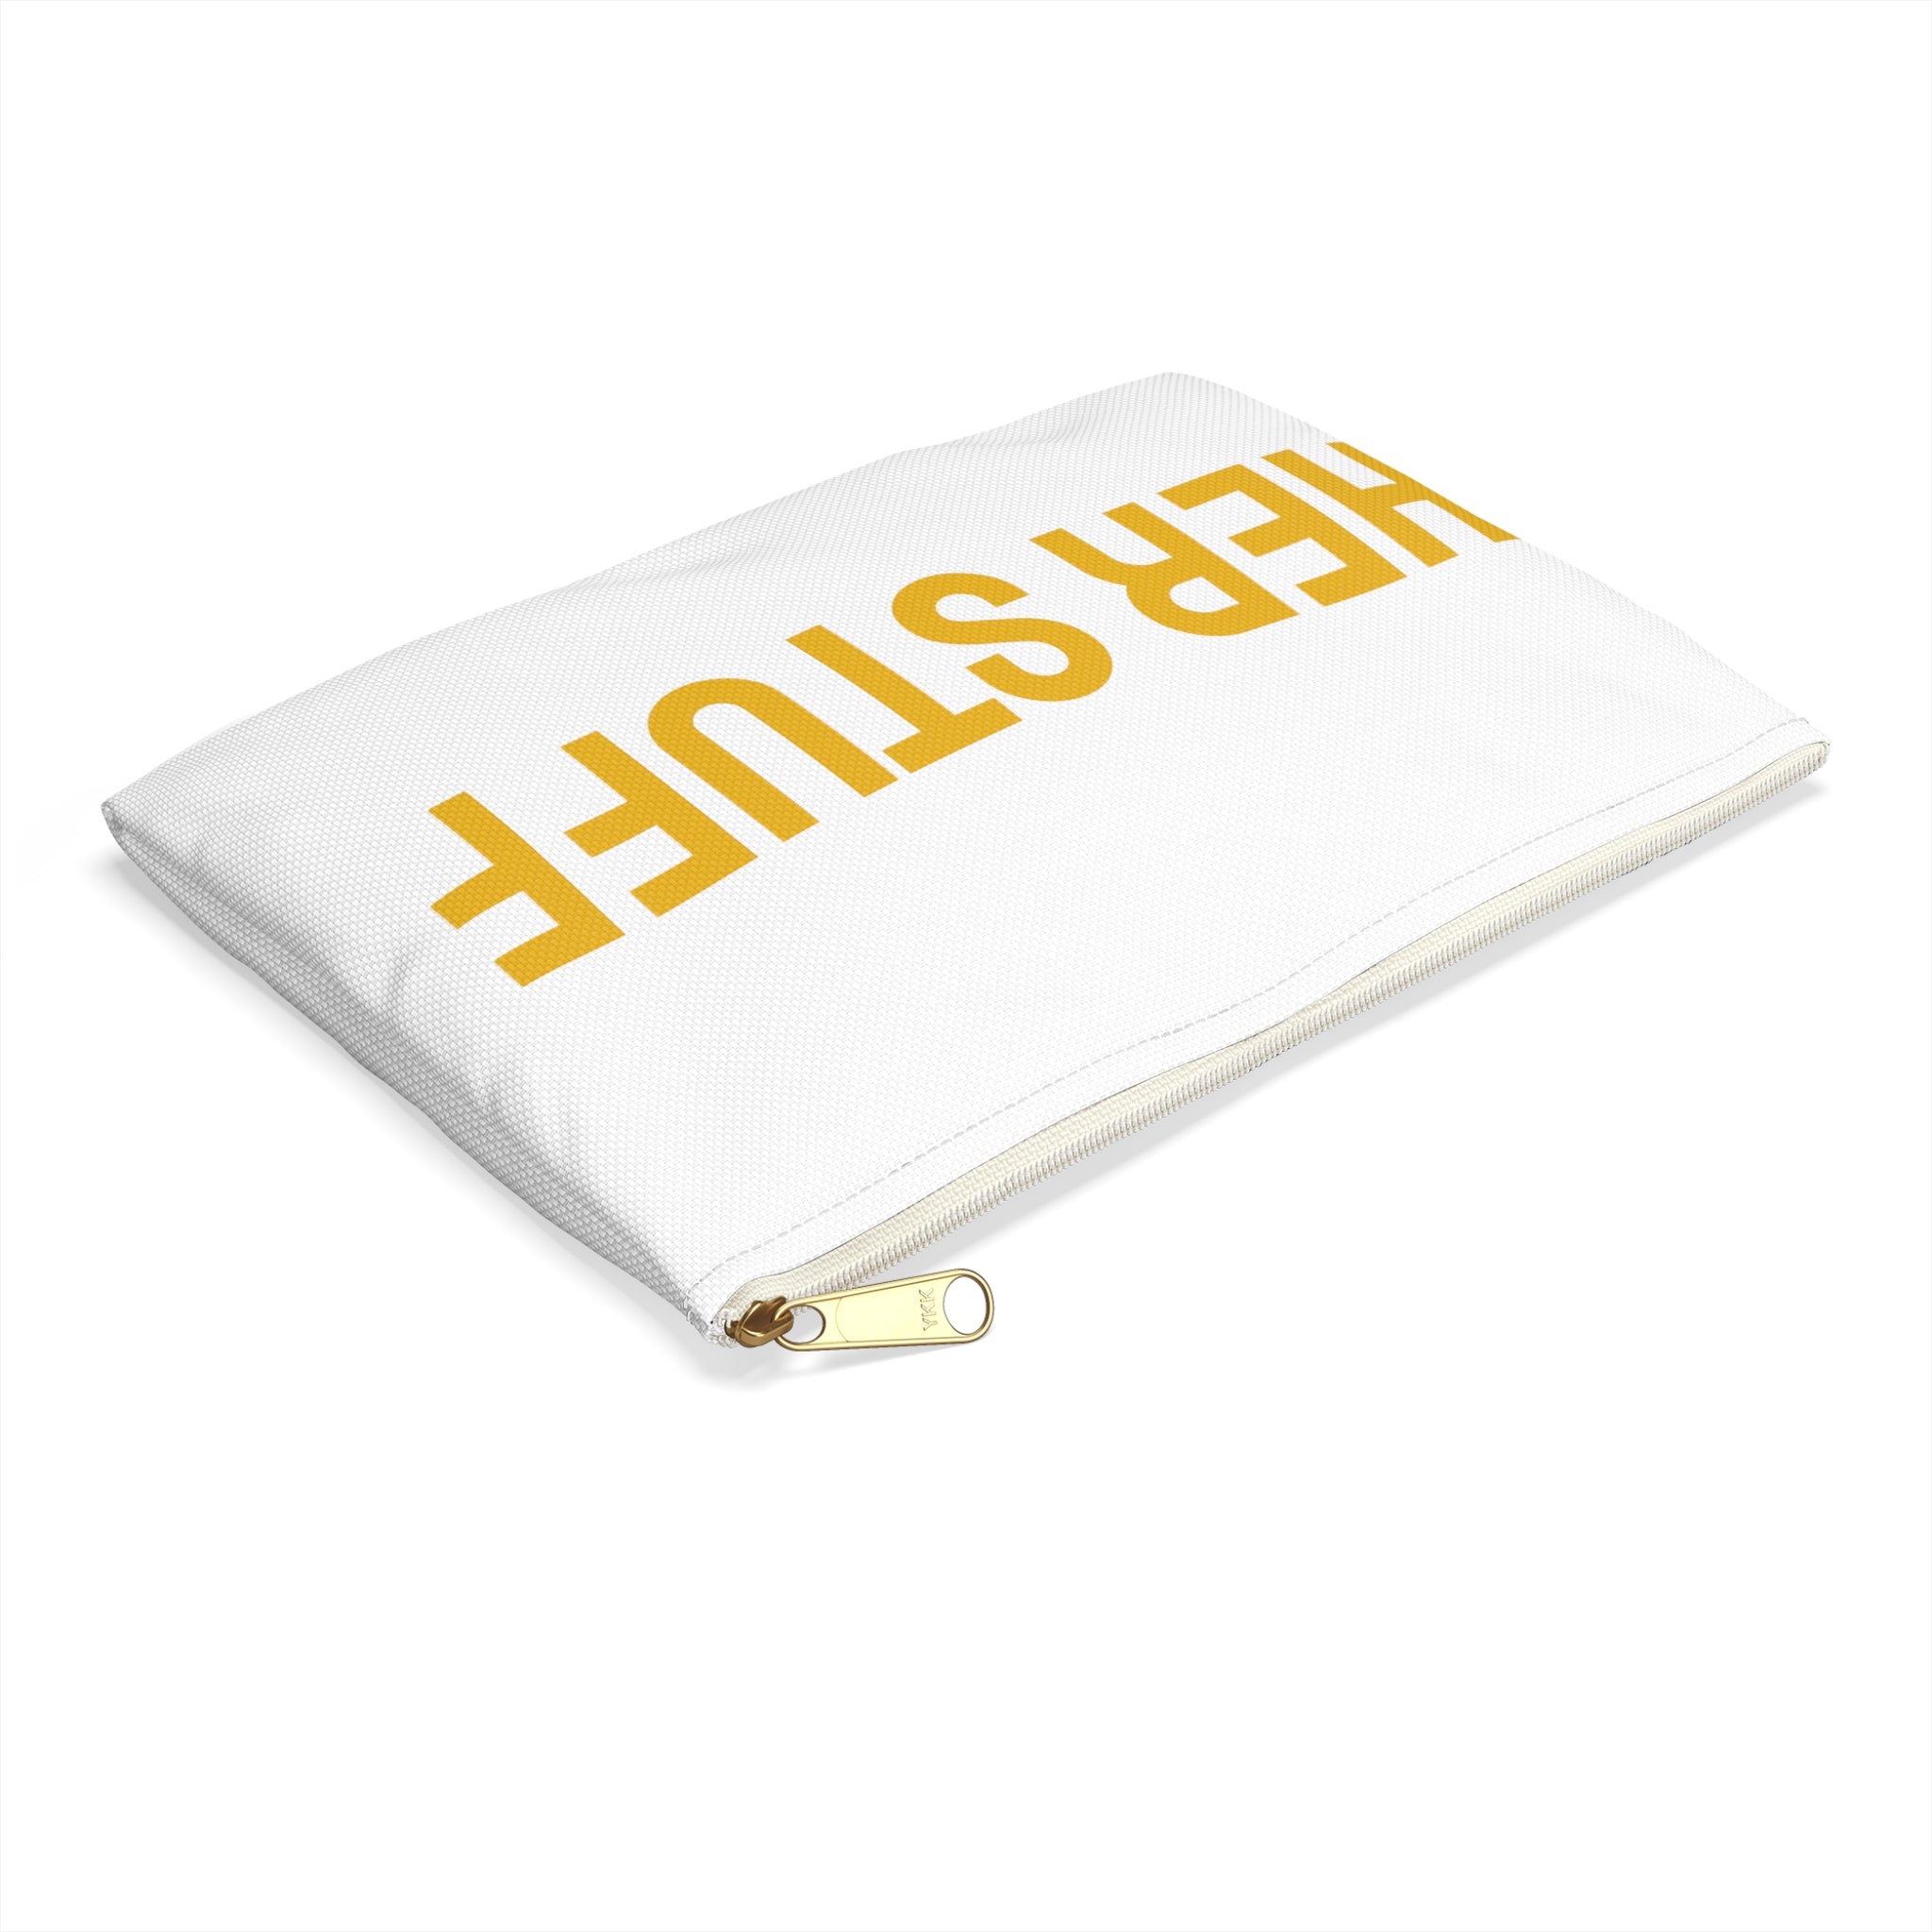 Her stuff Flat Pouch (White)